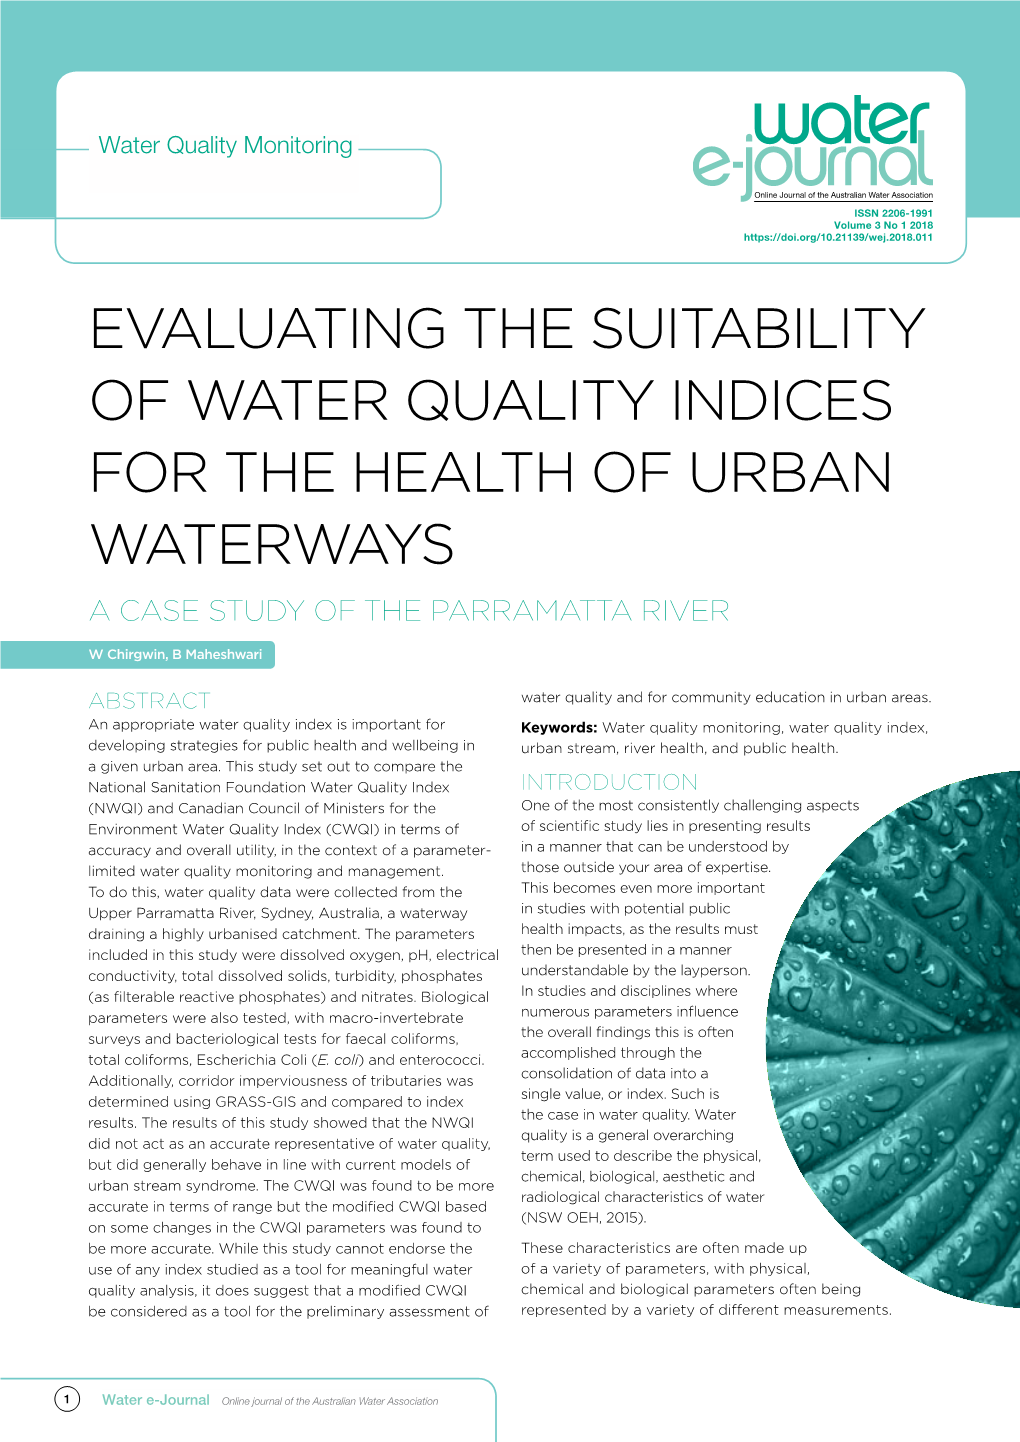 Evaluating the Suitability of Water Quality Indices for the Health of Urban Waterways a Case Study of the Parramatta River